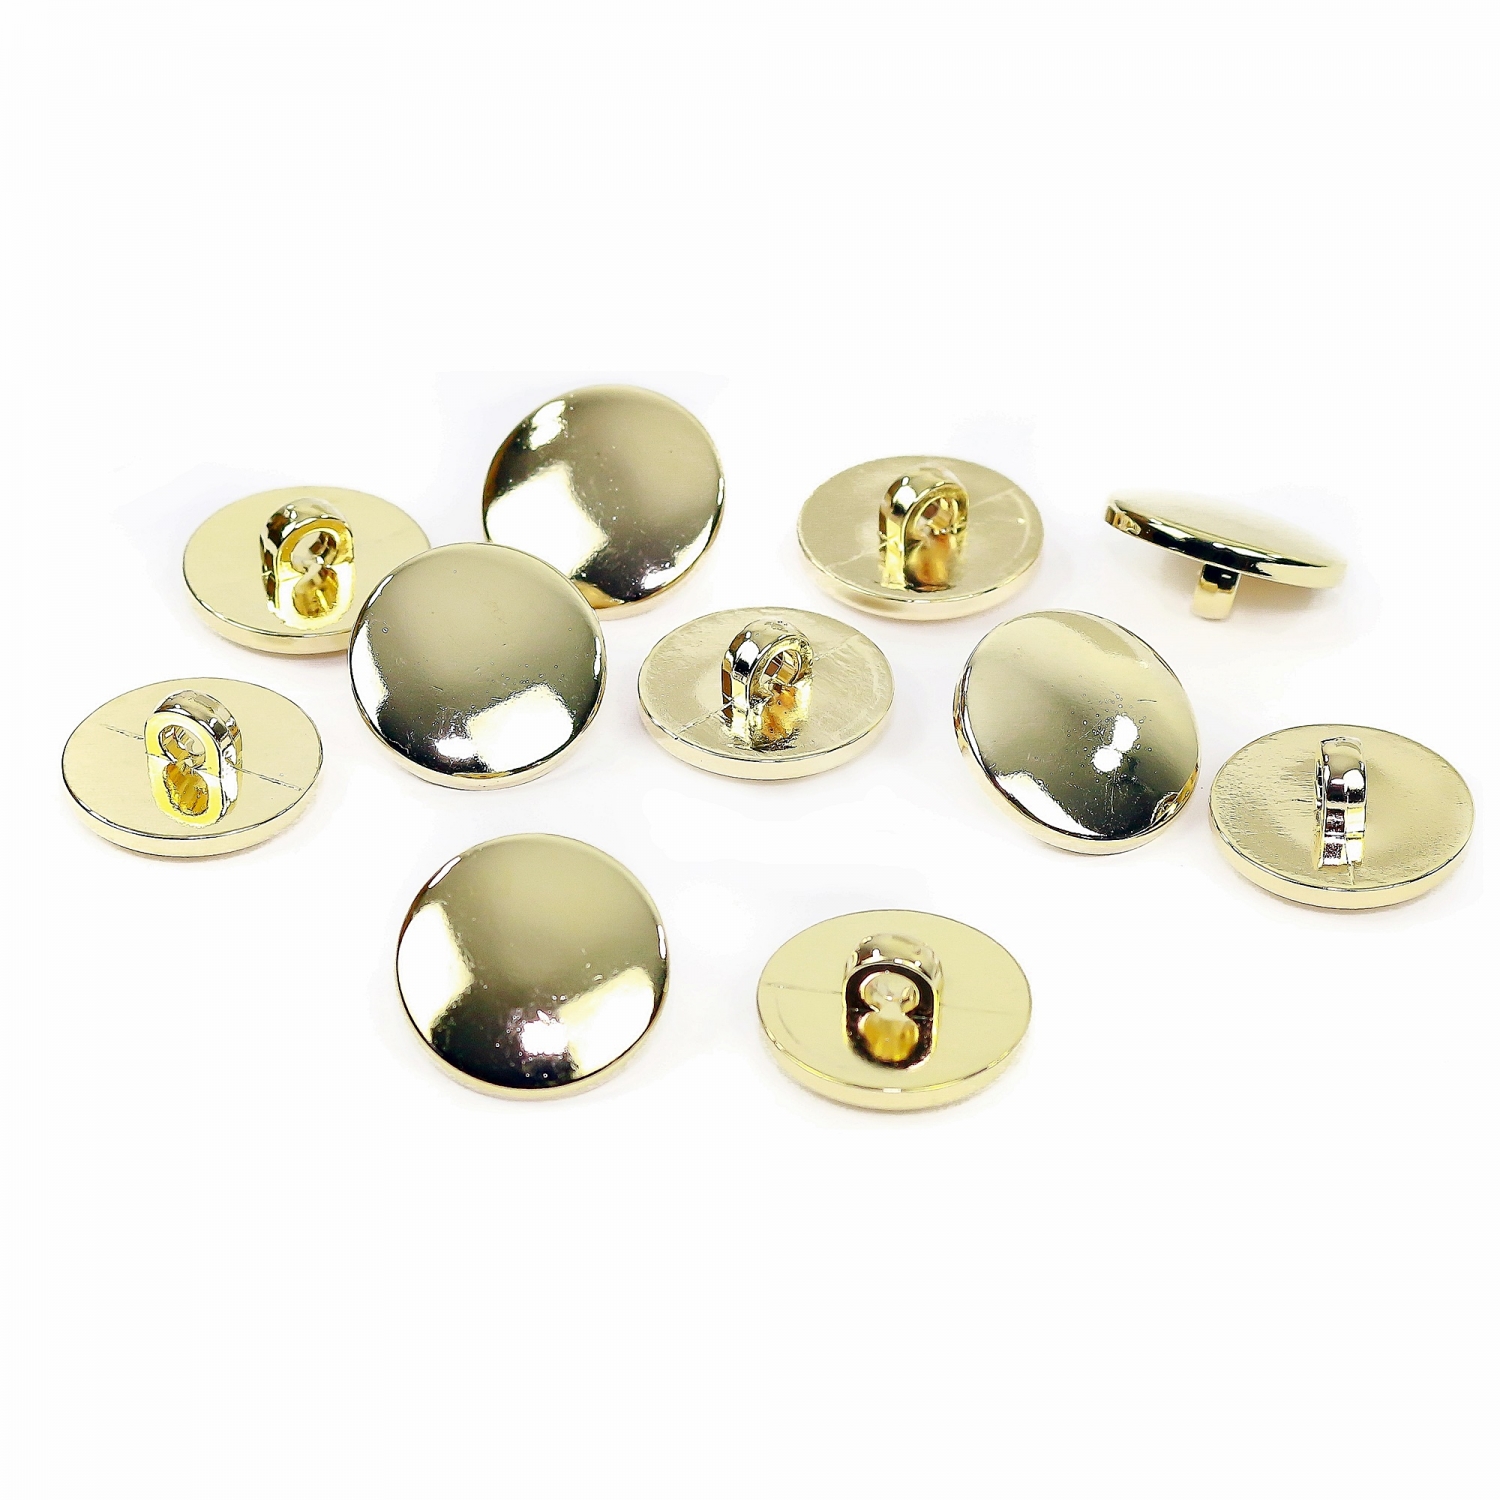 Plastic Metallized Shank Buttons (144 pcs/pack) Code: B3101